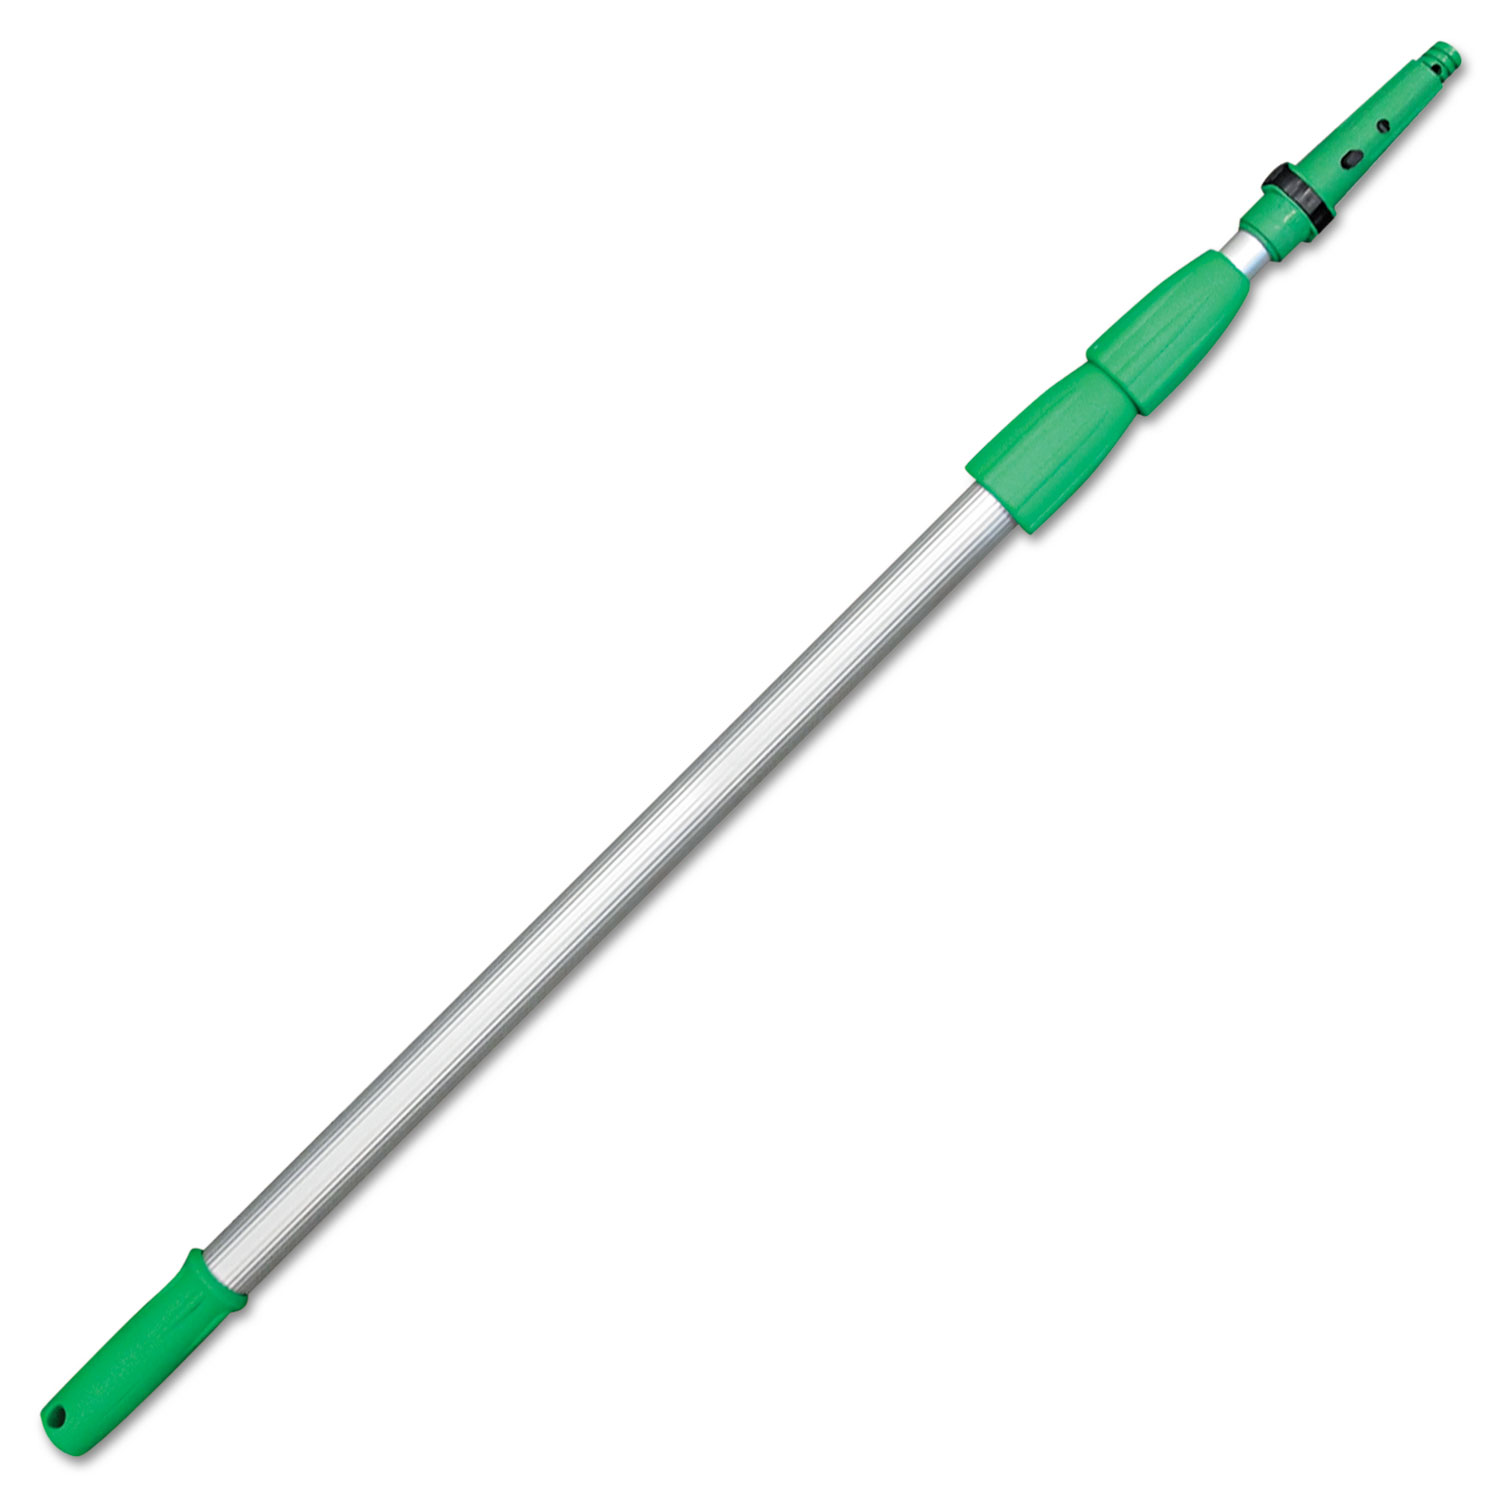 Opti-Loc Aluminum Extension Pole, 30 ft, Three Sections, Green/Silver